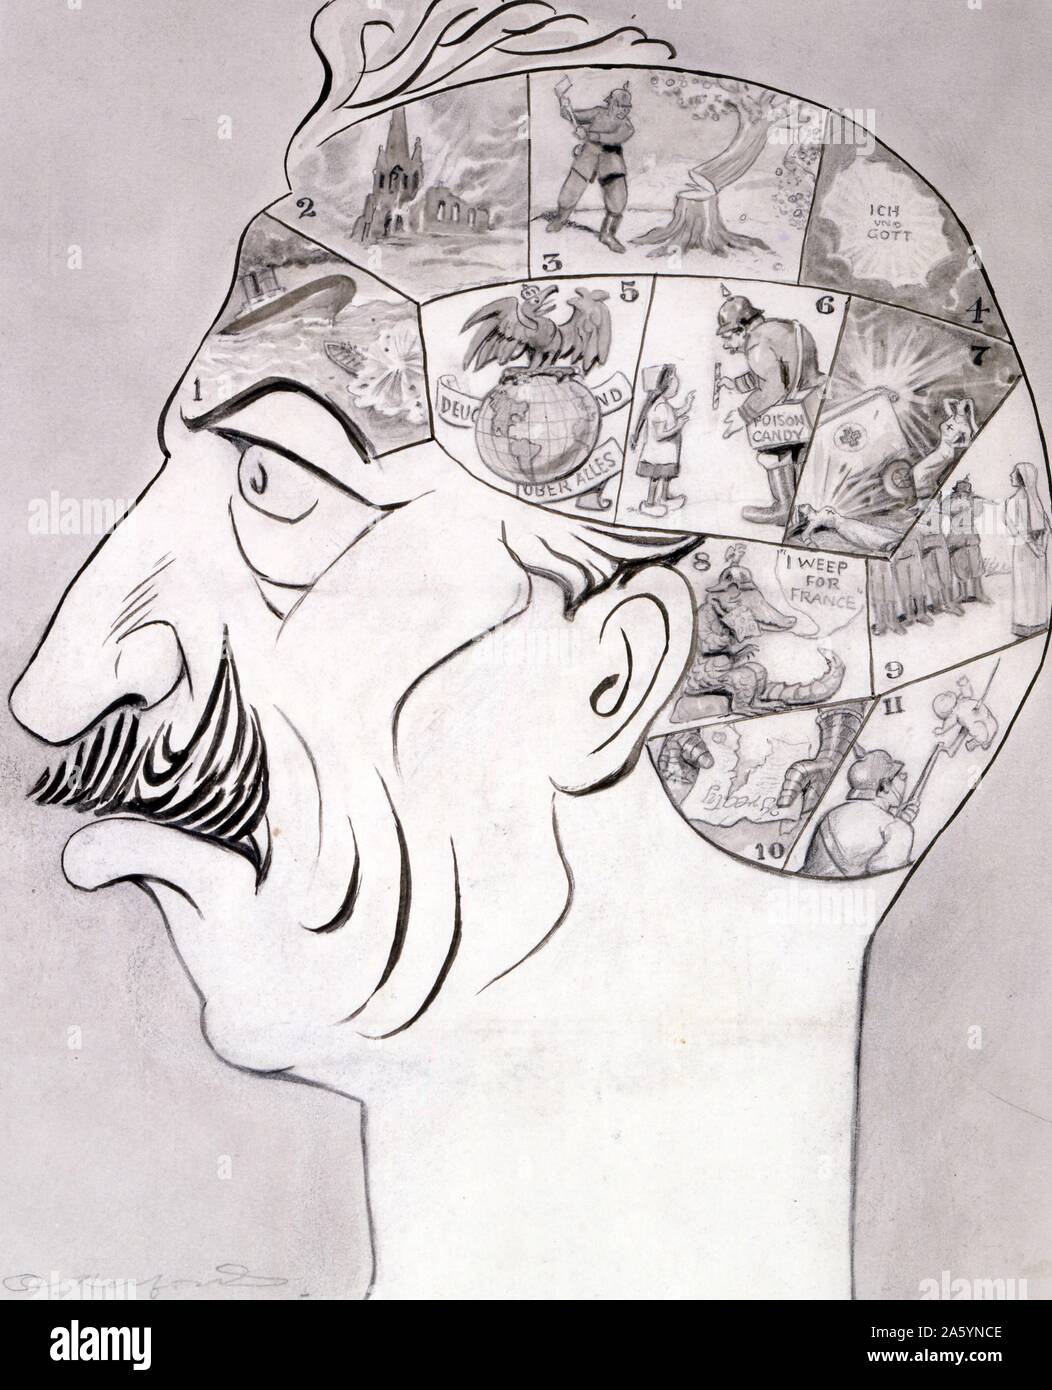 Phrenological chart of German brain, by Herford,1917. It shows Humanity (Lusitania sinking), Veneration (burning church), Love of nature (soldier chopping down a tree), Modesty (motto 'Ich und Gott'), Imagination (German eagle on a globe with the motto 'Deut[schla]nd uber alles'), Generosity (German soldier poisoning a Dutch girl with candy), Compassion (destruction of Red Cross wagons and nurses dying), Sympathy (crocodile shedding tears for France), Chivalry (firing squad aiming at a nurse), Integrity (treaty shred), Love of children (soldier with bayonet). Cartoon appeared in Life Magazine. Stock Photo